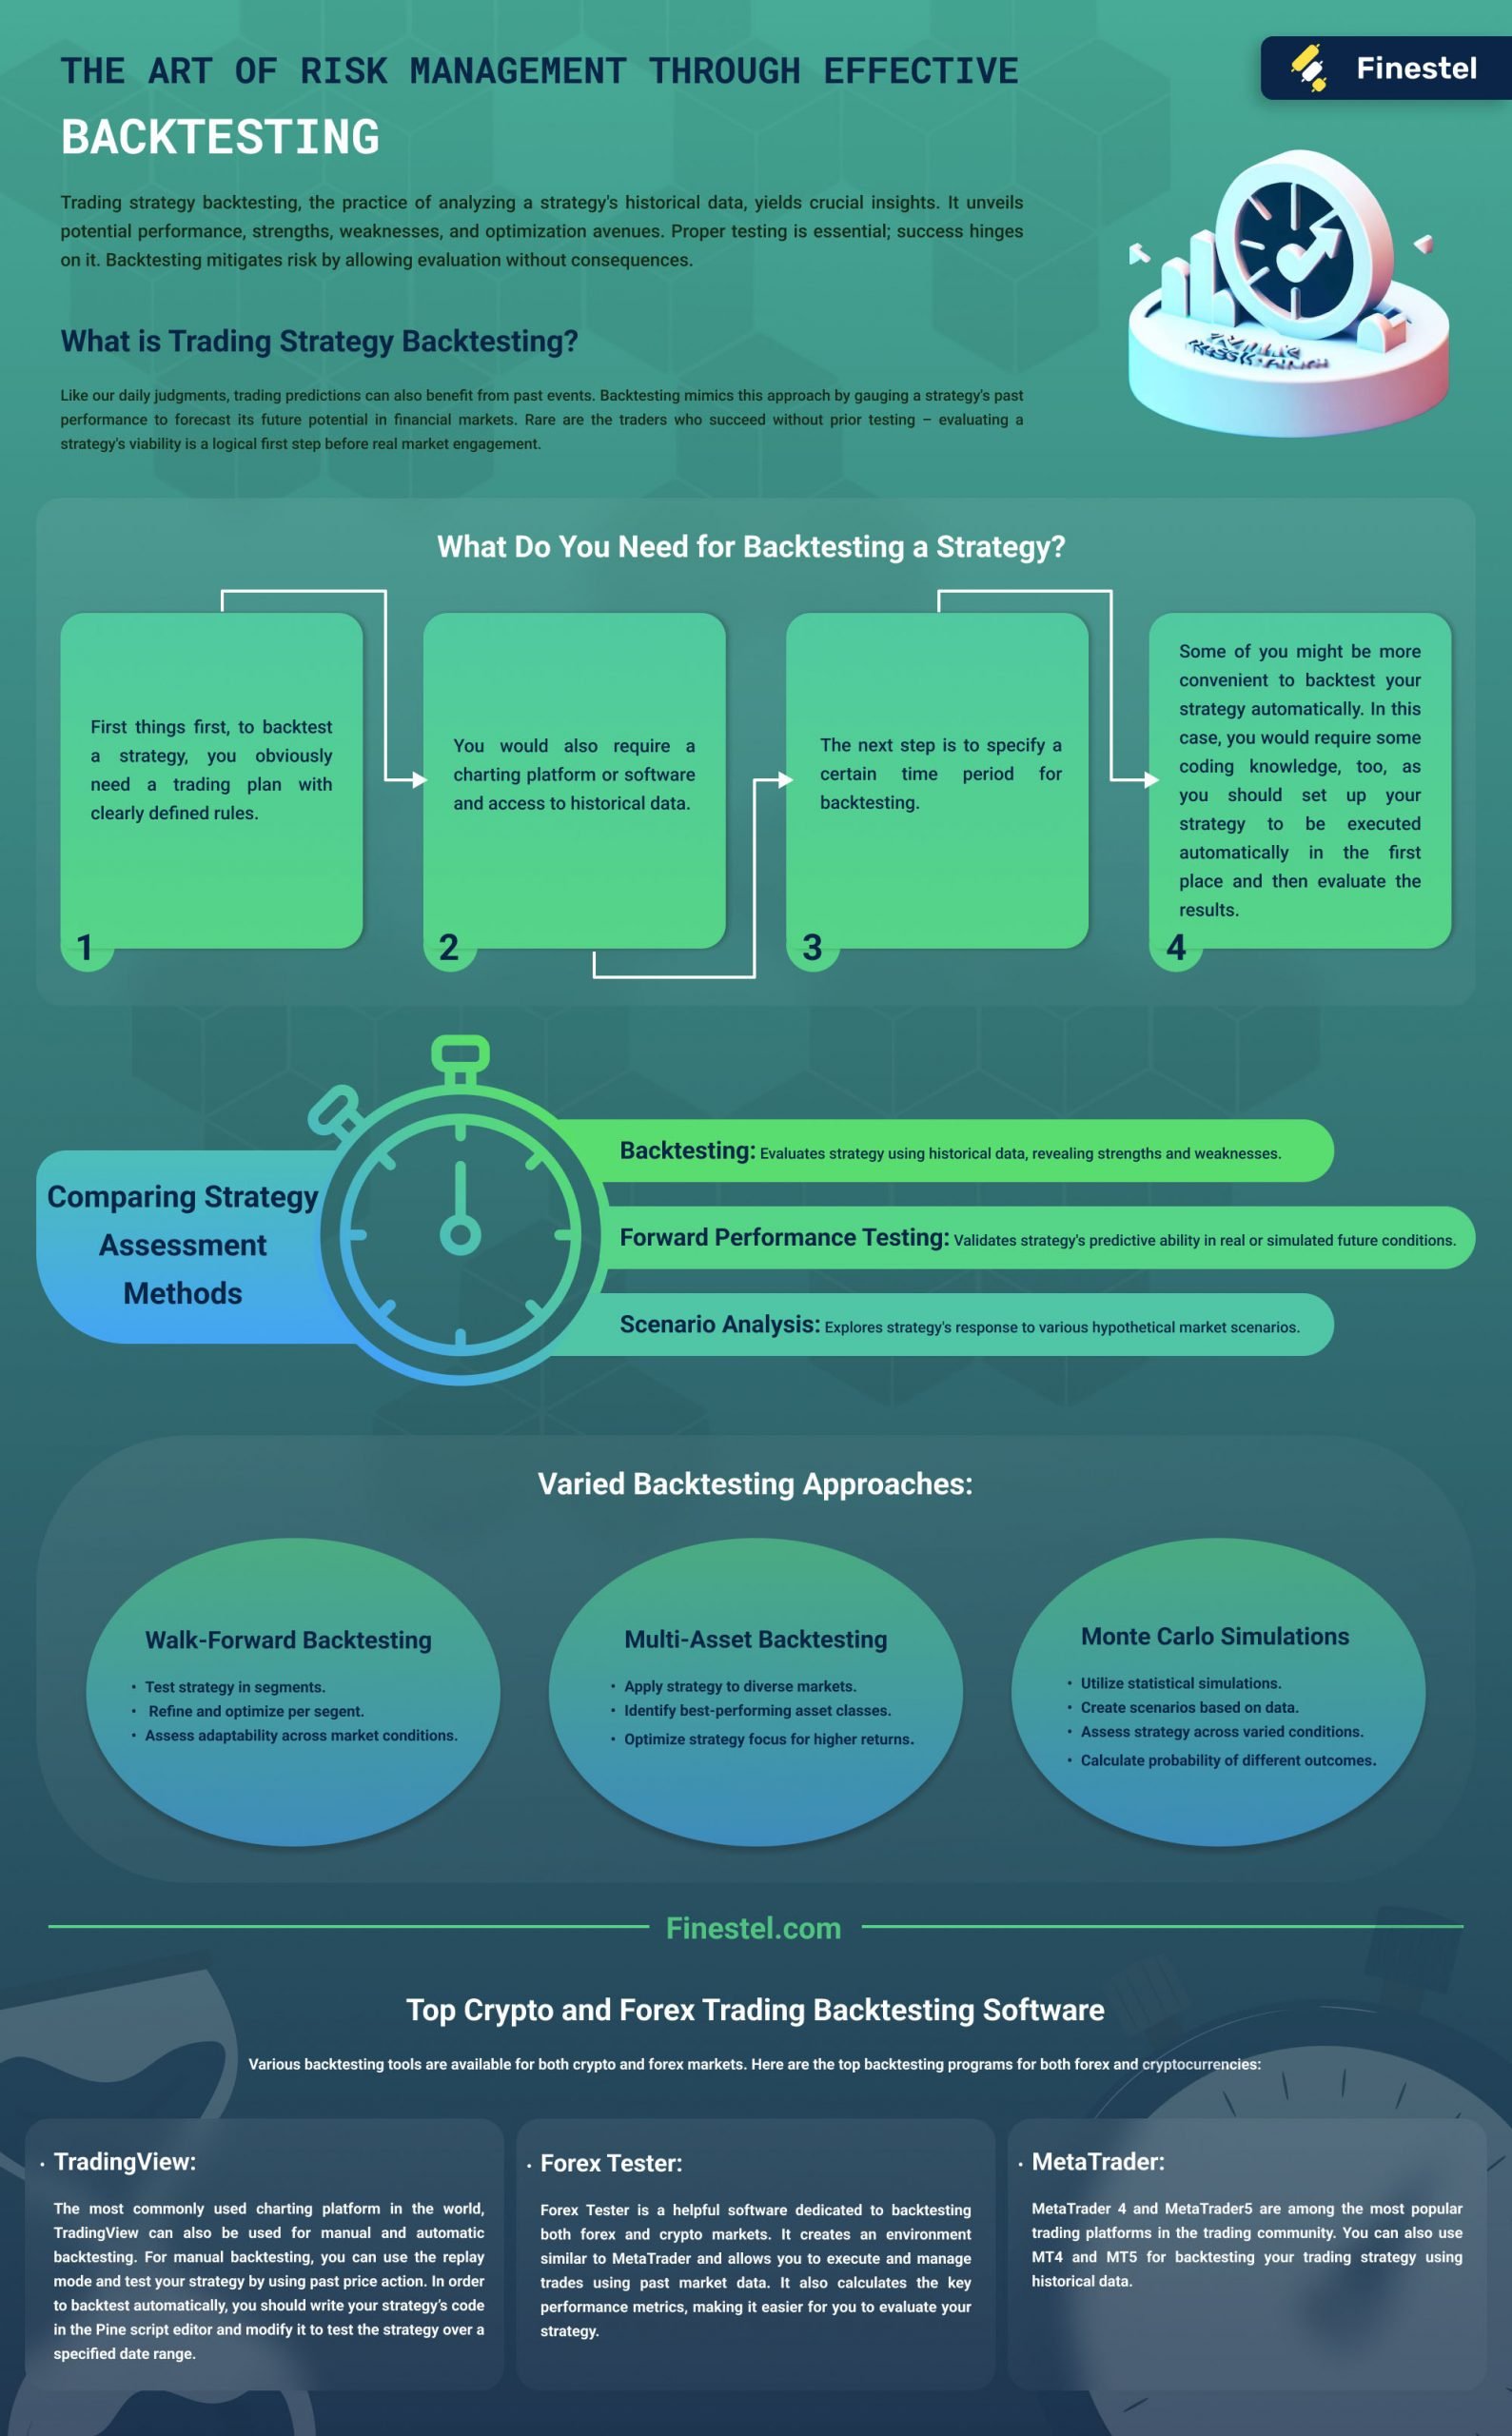 Trading Strategy Backtesting Infographic